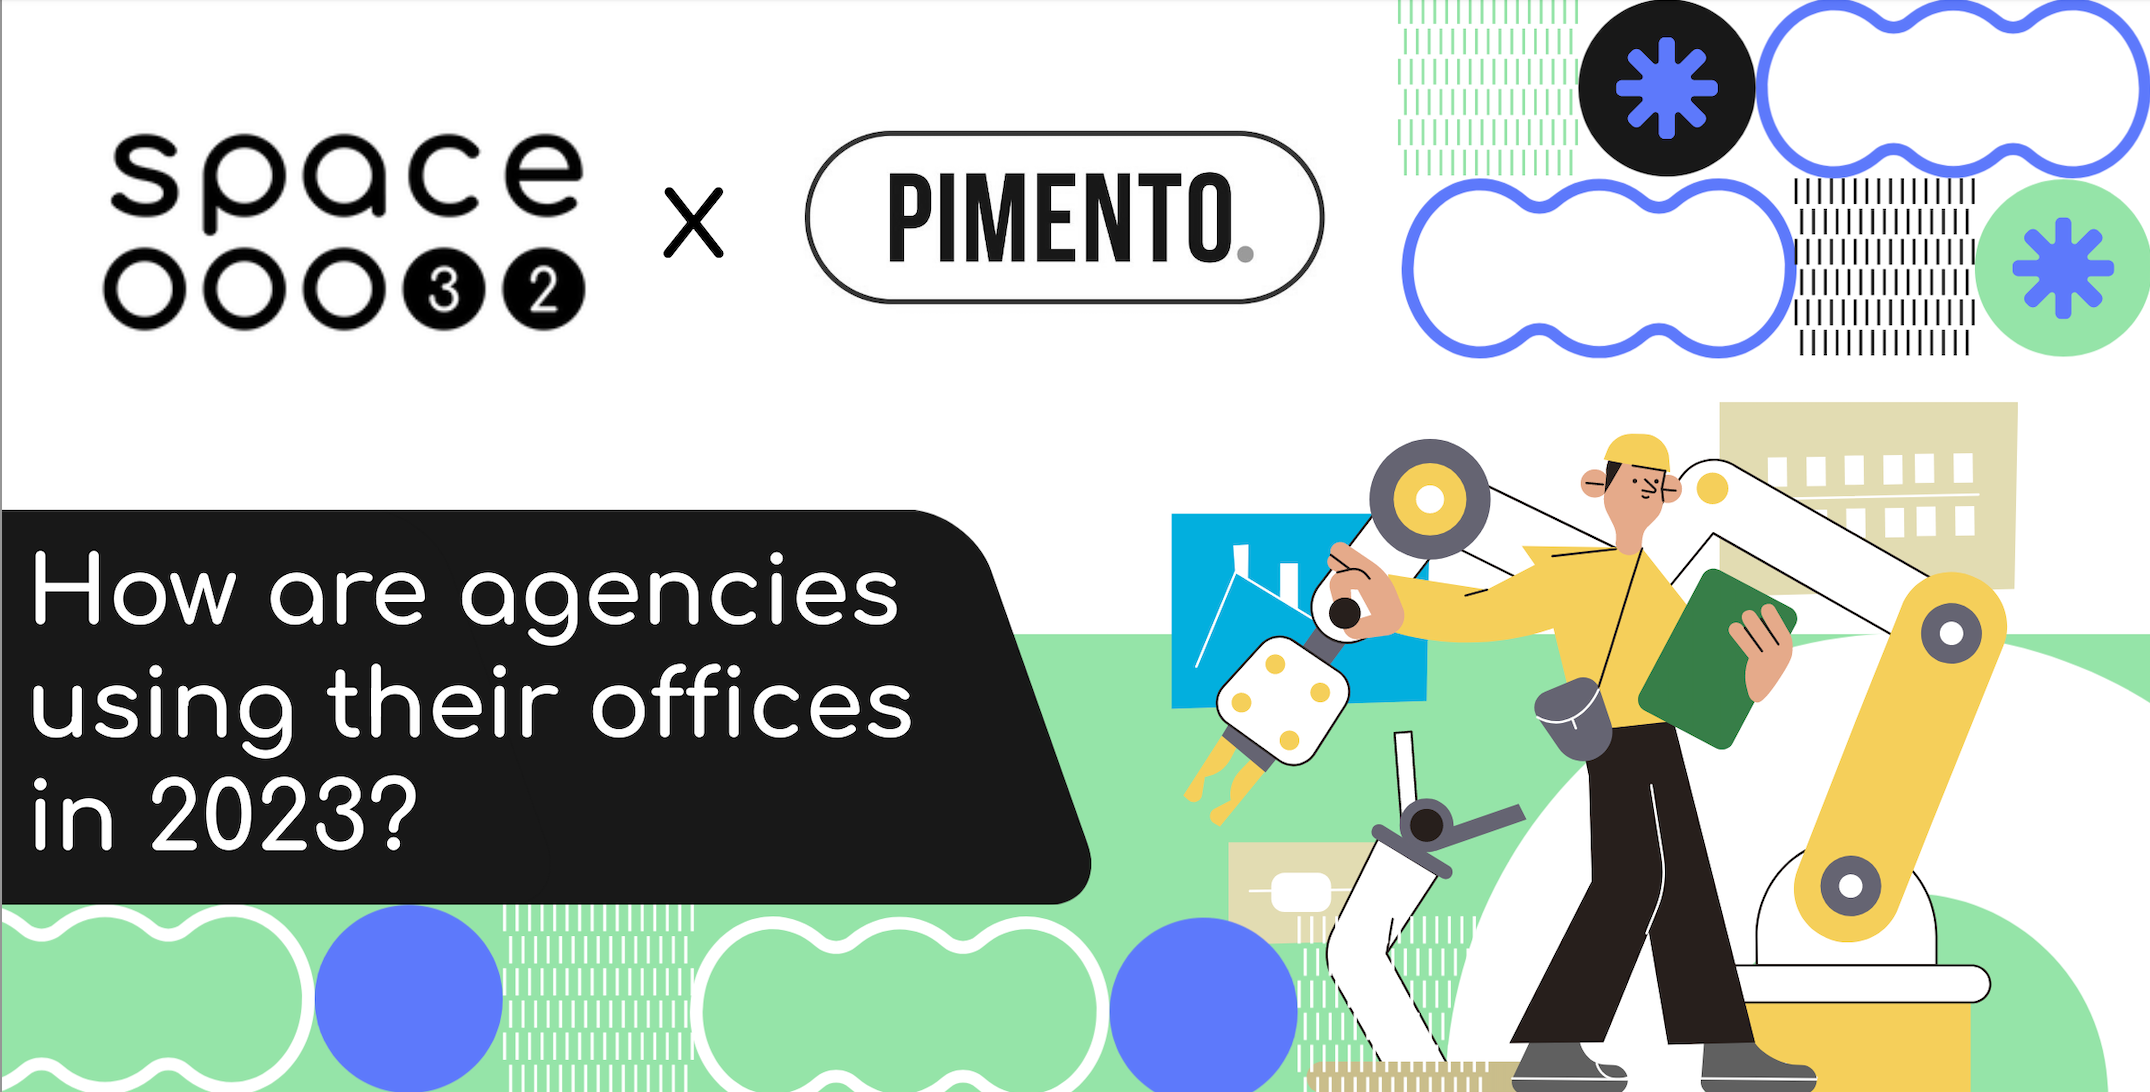 How are agencies using their office space in 2023?